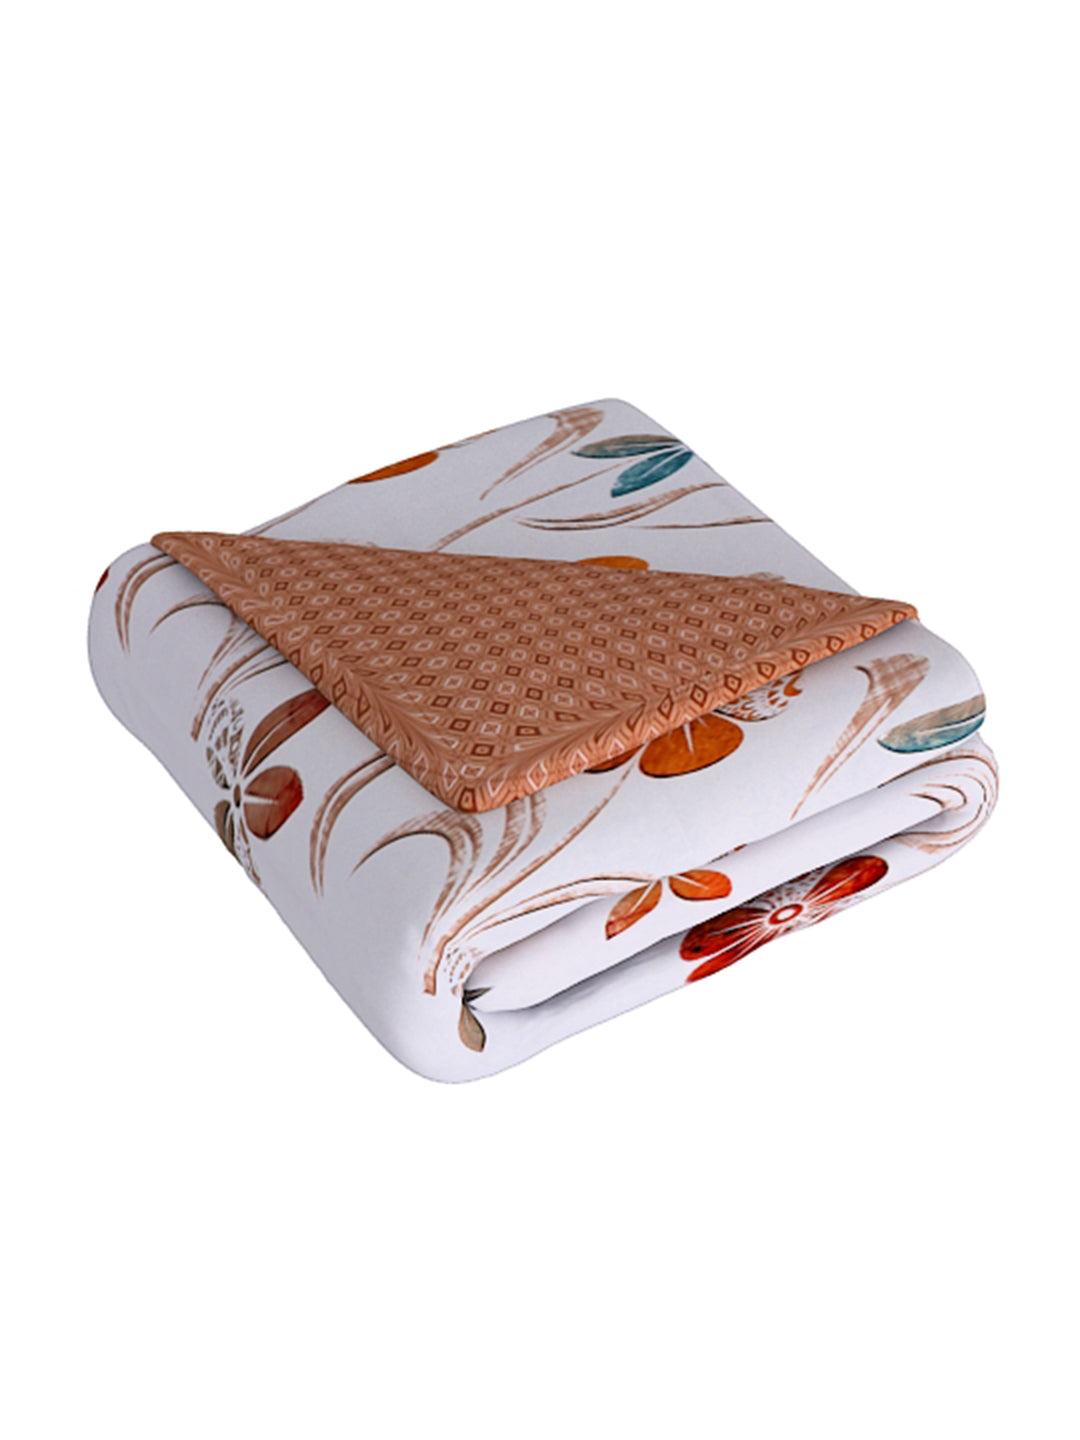 Brown & White Printed Double Queen Bedding Set